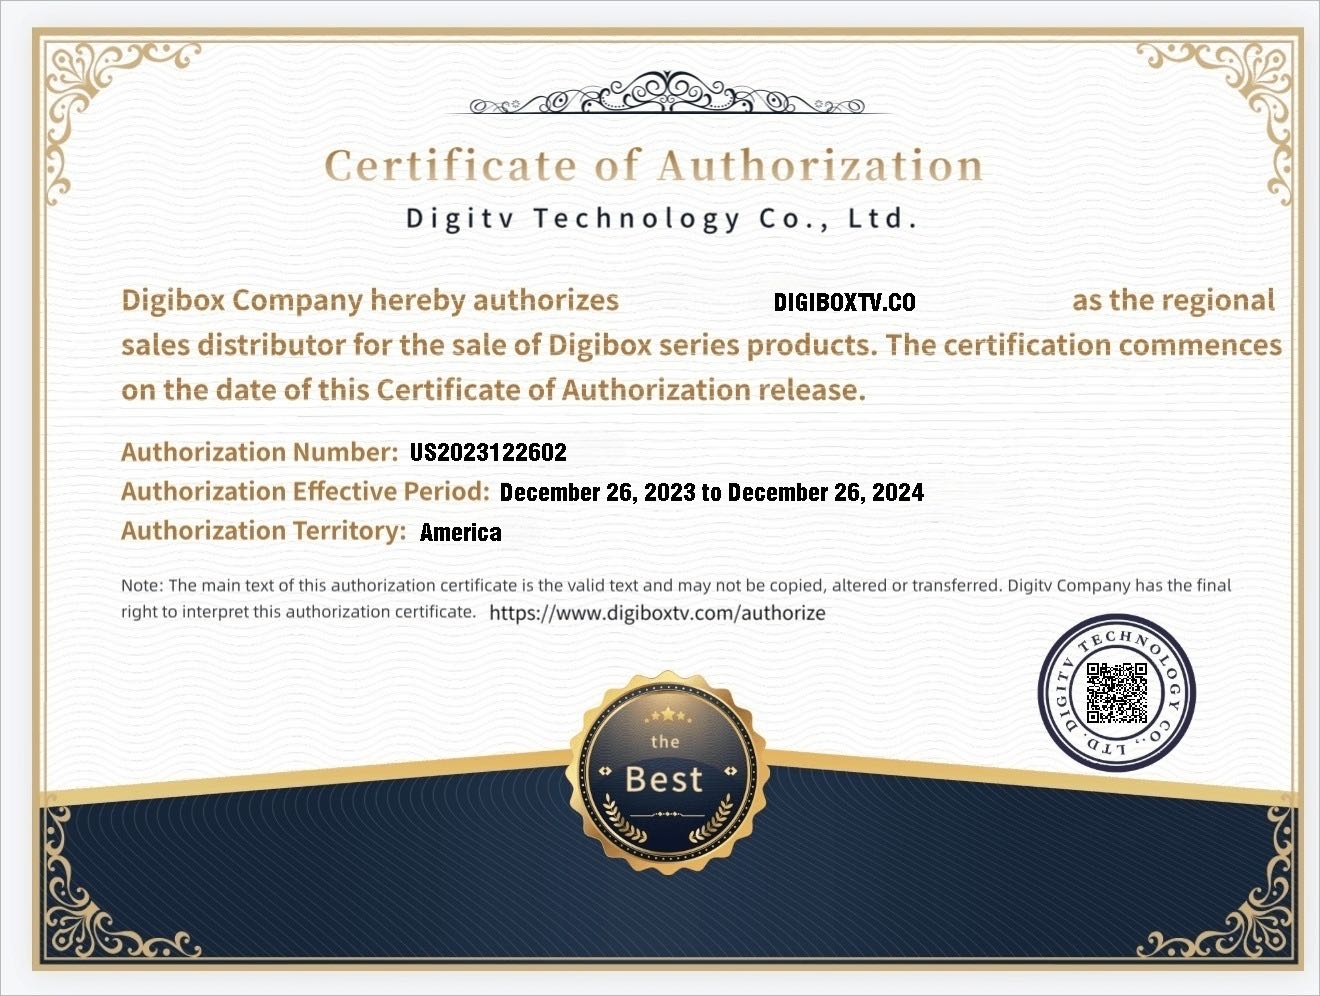 This is a certificate of authorization, which indicates that the website digiboxtv.co is a distributor of Digibox products.